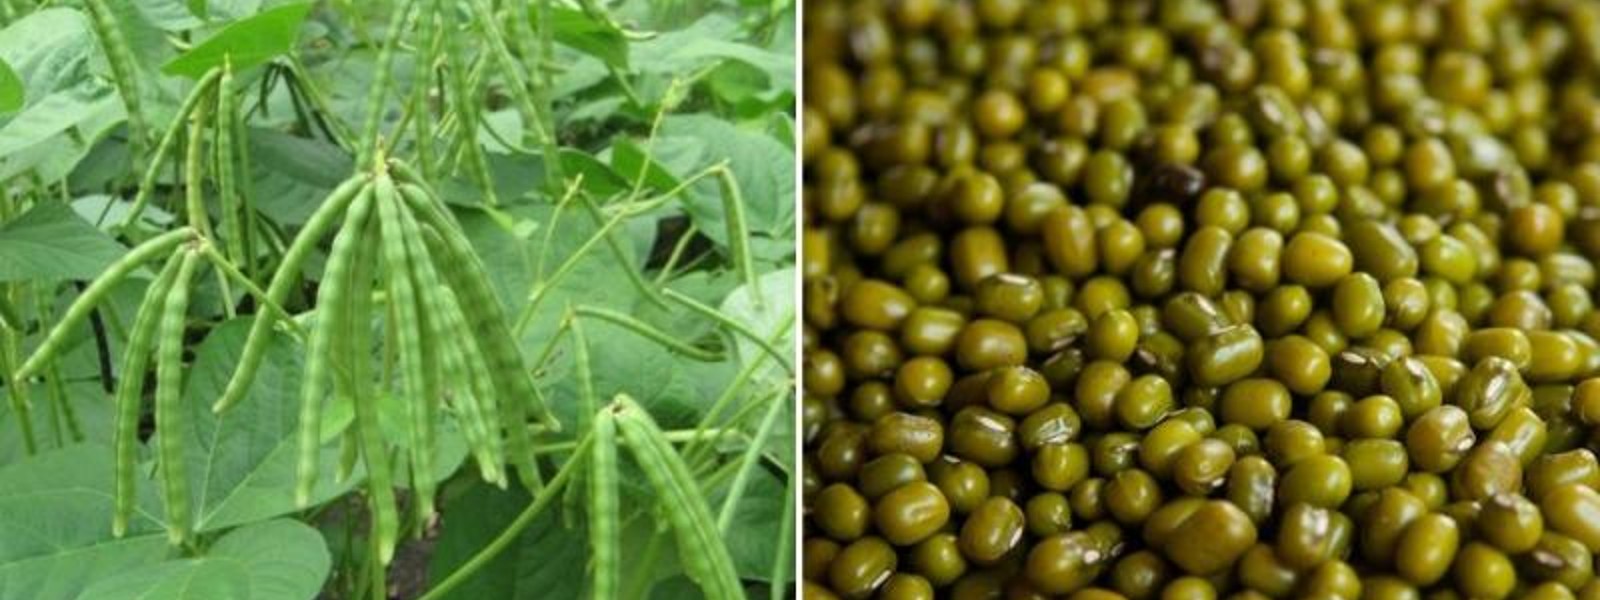 Mahaweli to cultivate 1,000 acres of Mung beans